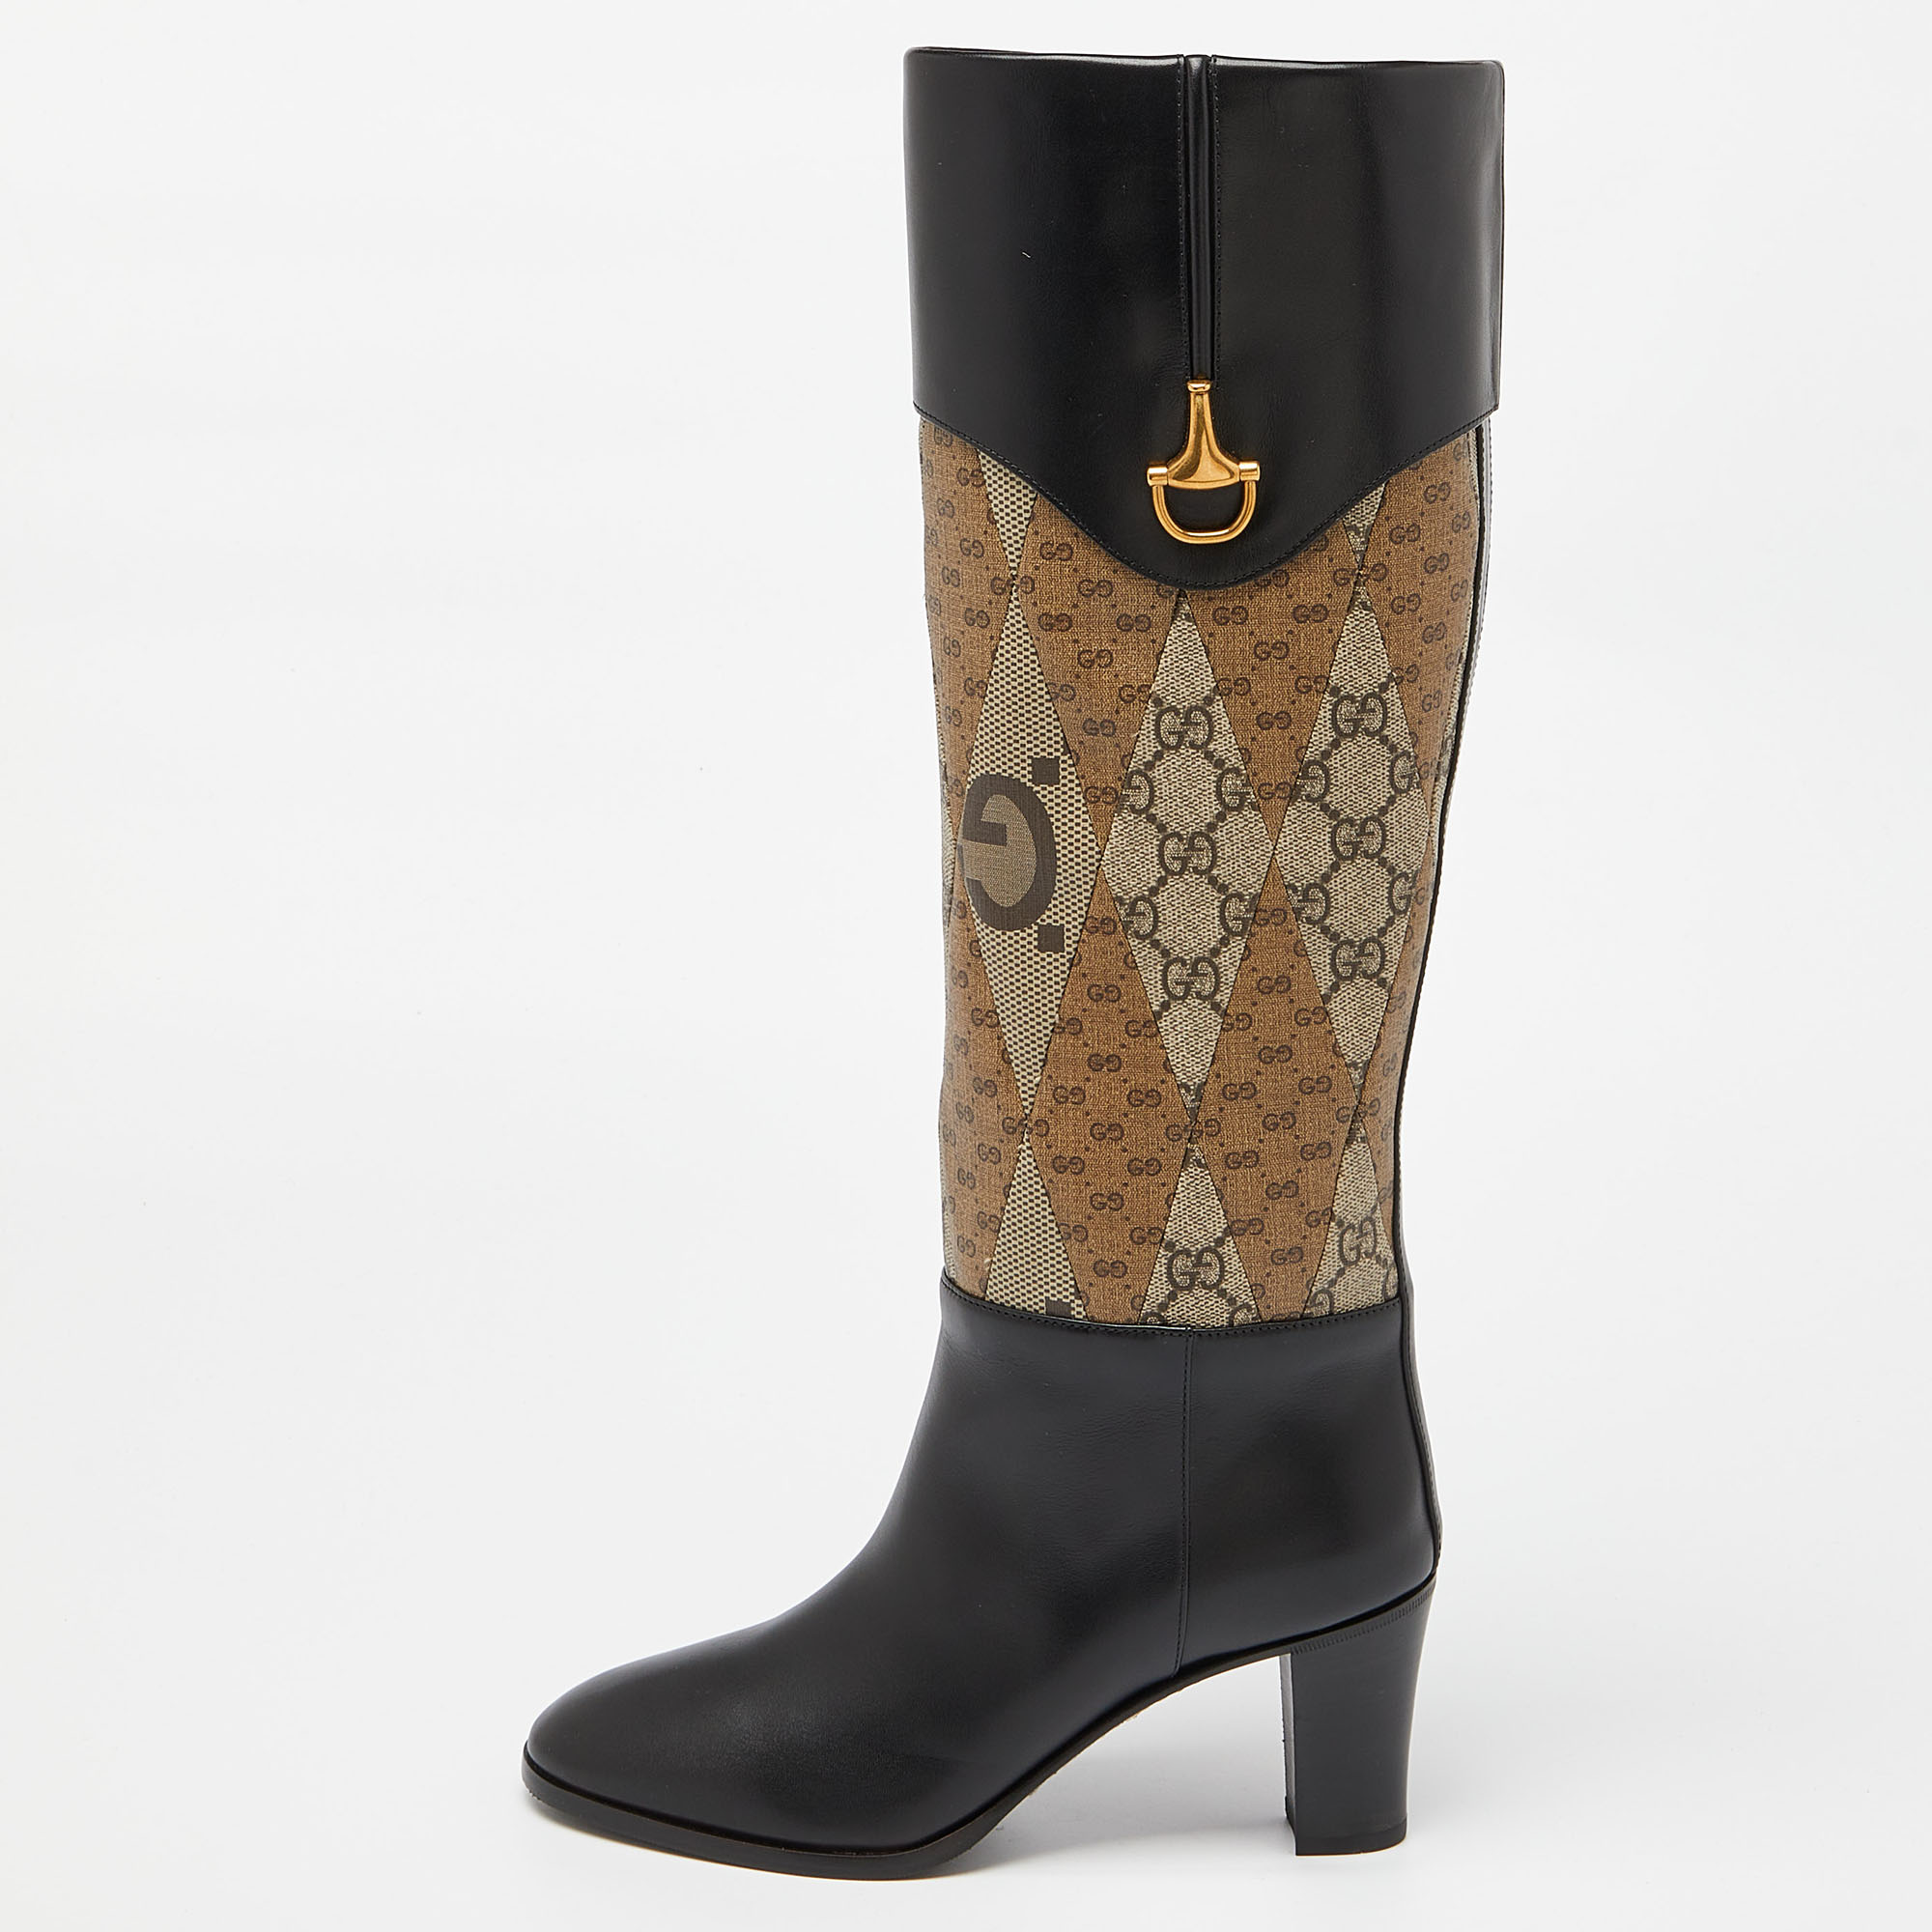 Gucci black/beige jumbo gg supreme canvas and leather horsebit knee length boots size 38